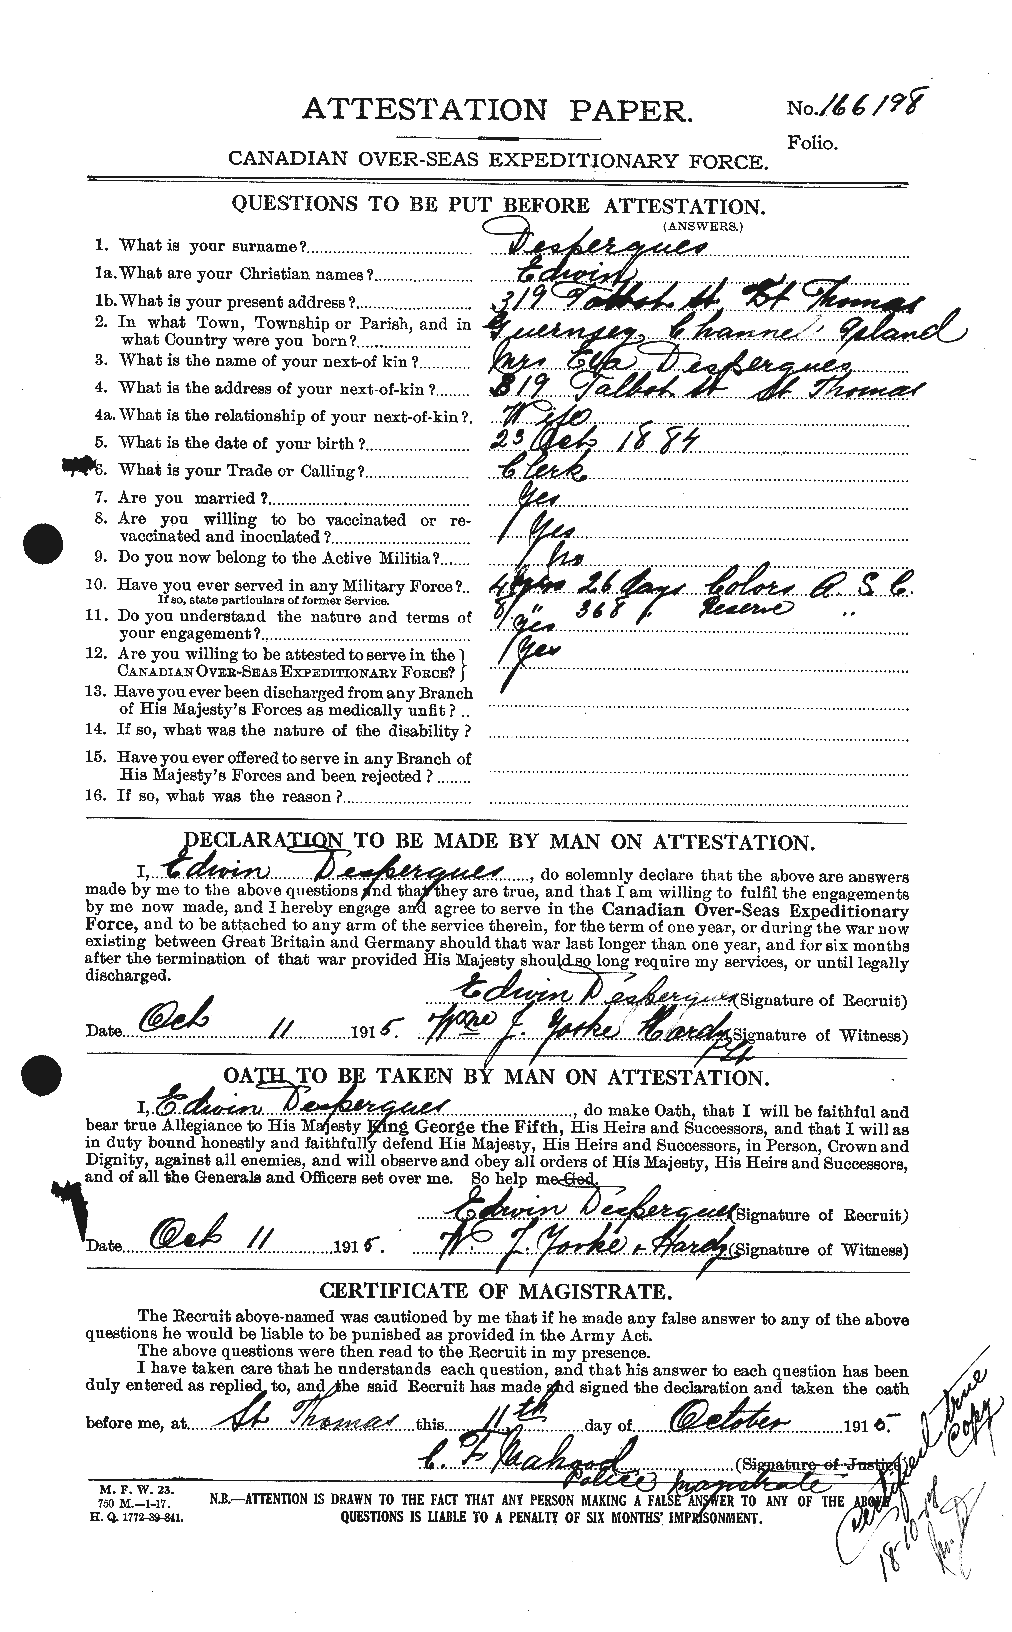 Personnel Records of the First World War - CEF 291479a